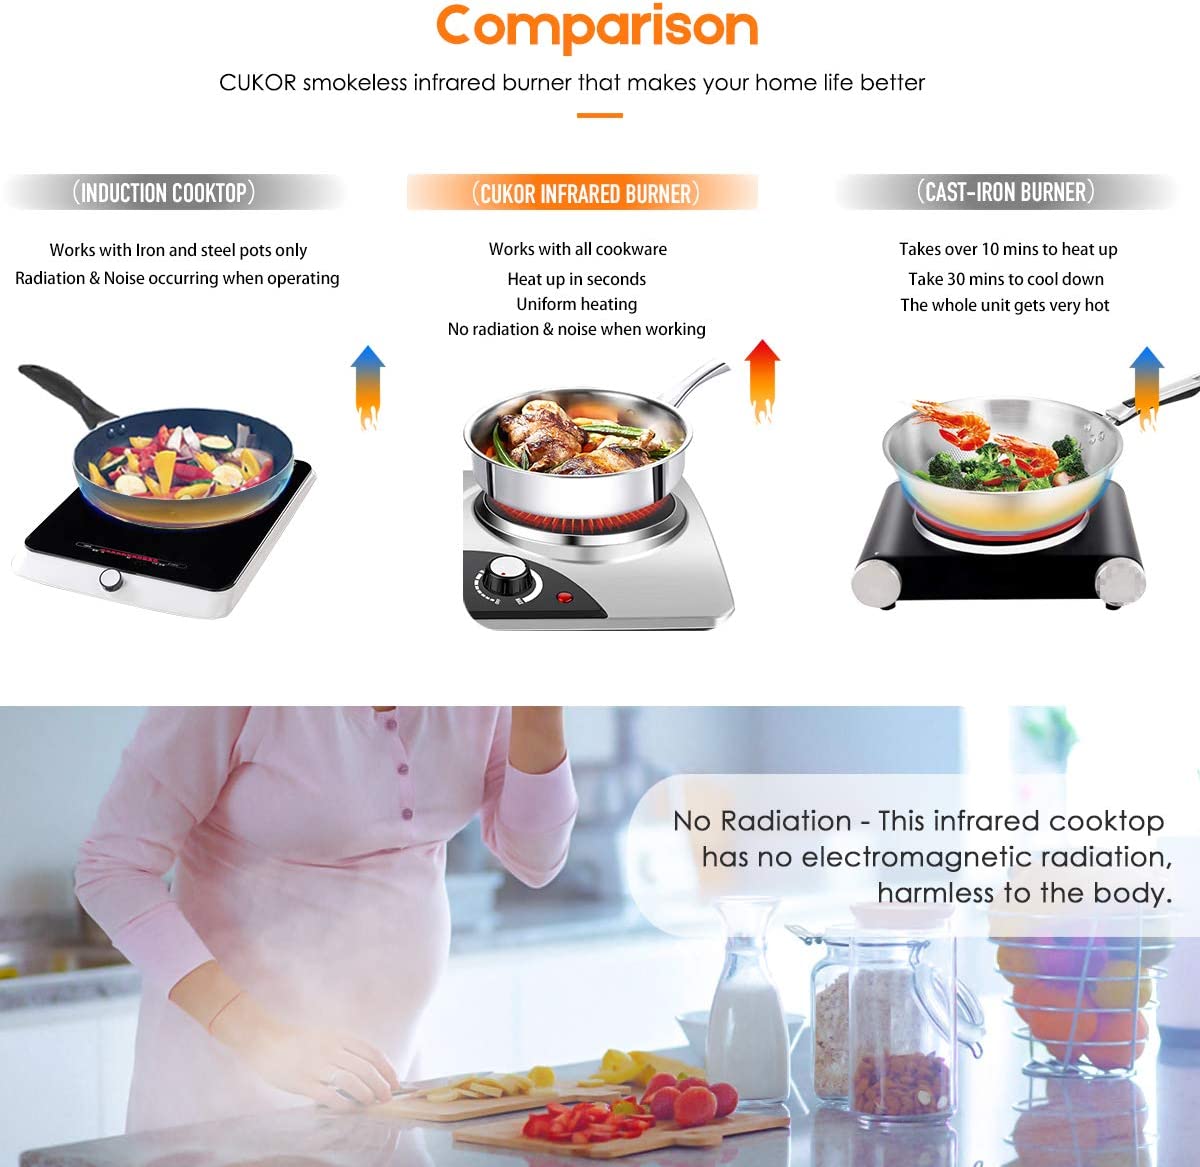 7.1 Inch Ceramic Glass Double Hot Plate Cooktop for Dorm Office Home Camp CUKOR Portable Electric Stove Compatible w/All Cookware 1800W Infrared Double Burner Heat-up In Seconds 